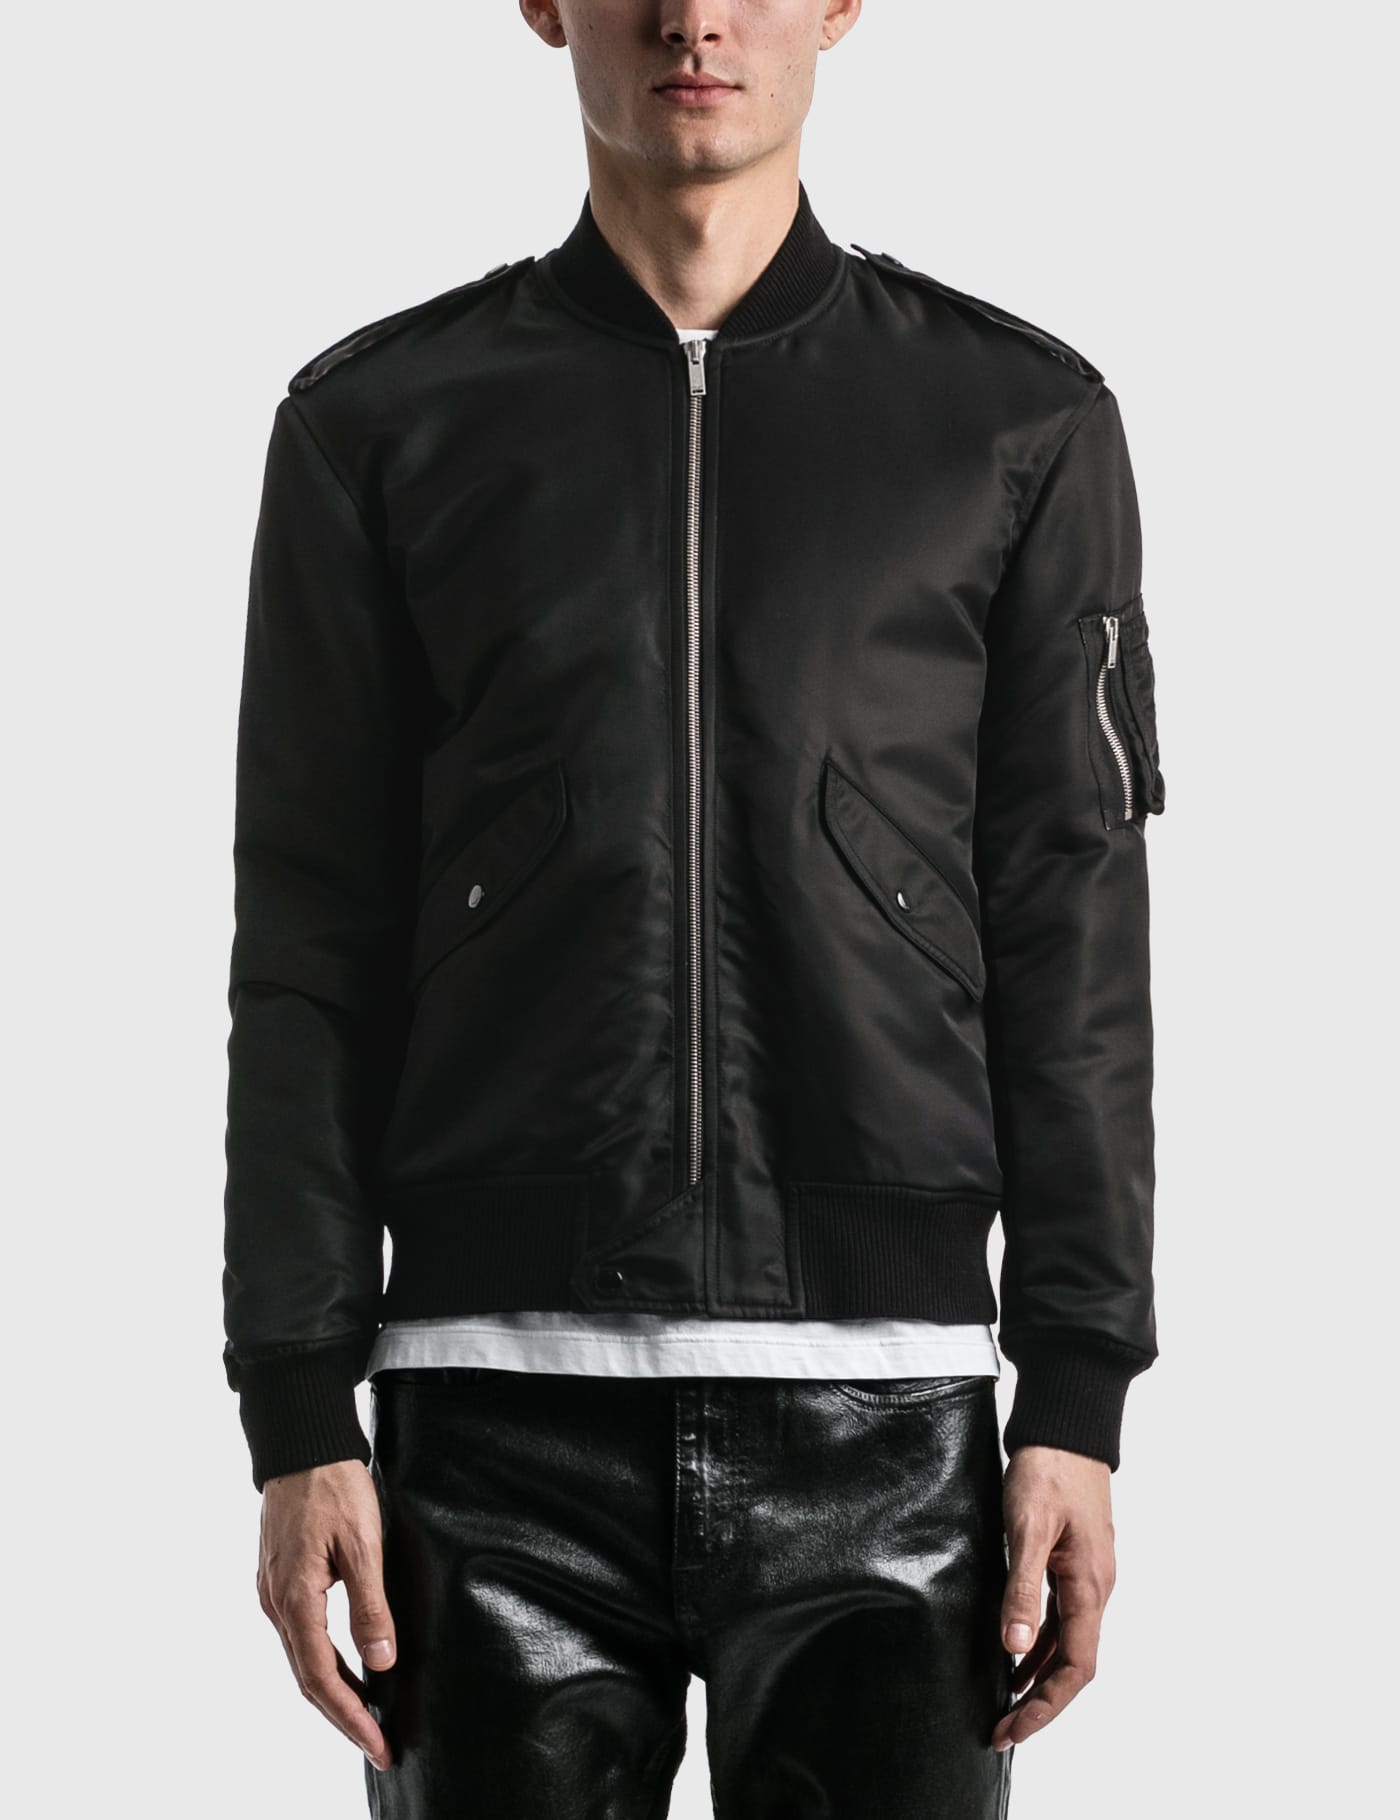 Saint Laurent - Bomber Jacket | HBX - Globally Curated Fashion and 